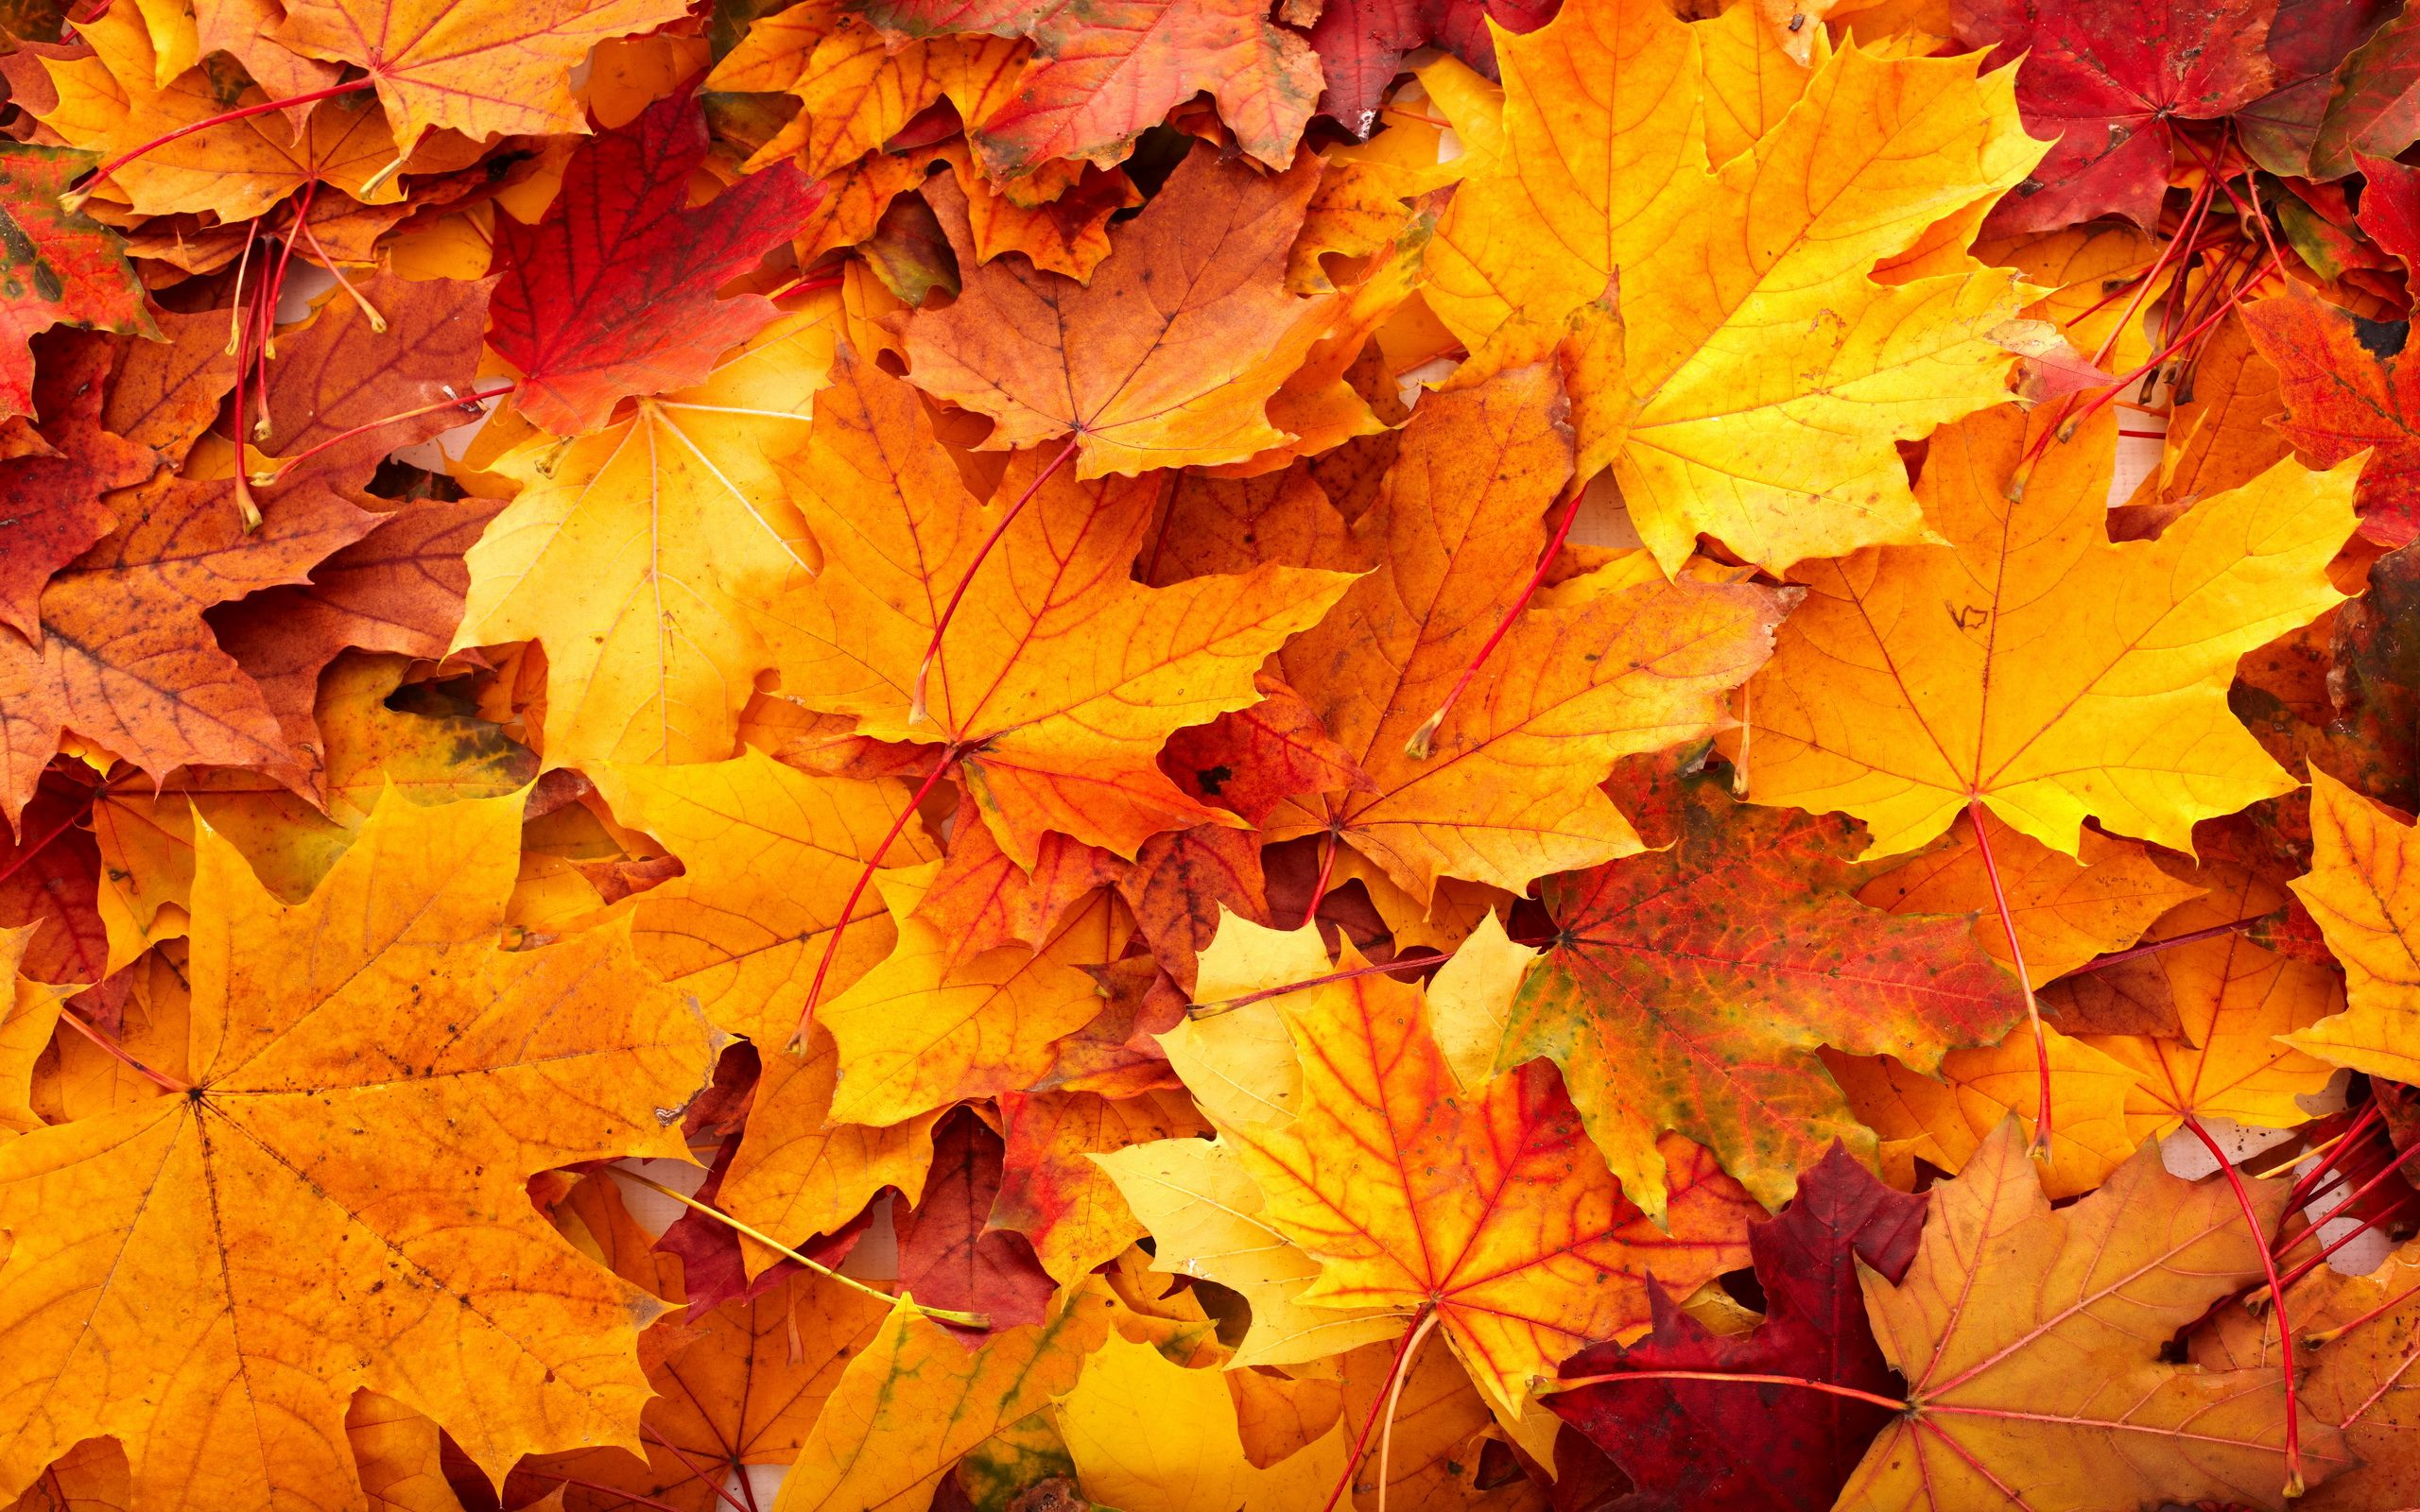 Autumn Leaves Wallpaper With Yellow Color Leaves Beautiful Autumn Wallpaper For Interior Wall Decor Idea Fall Scenery Background Fall Leaves Desktop Wallpaper[1]. Italian American Police Society Of N.J